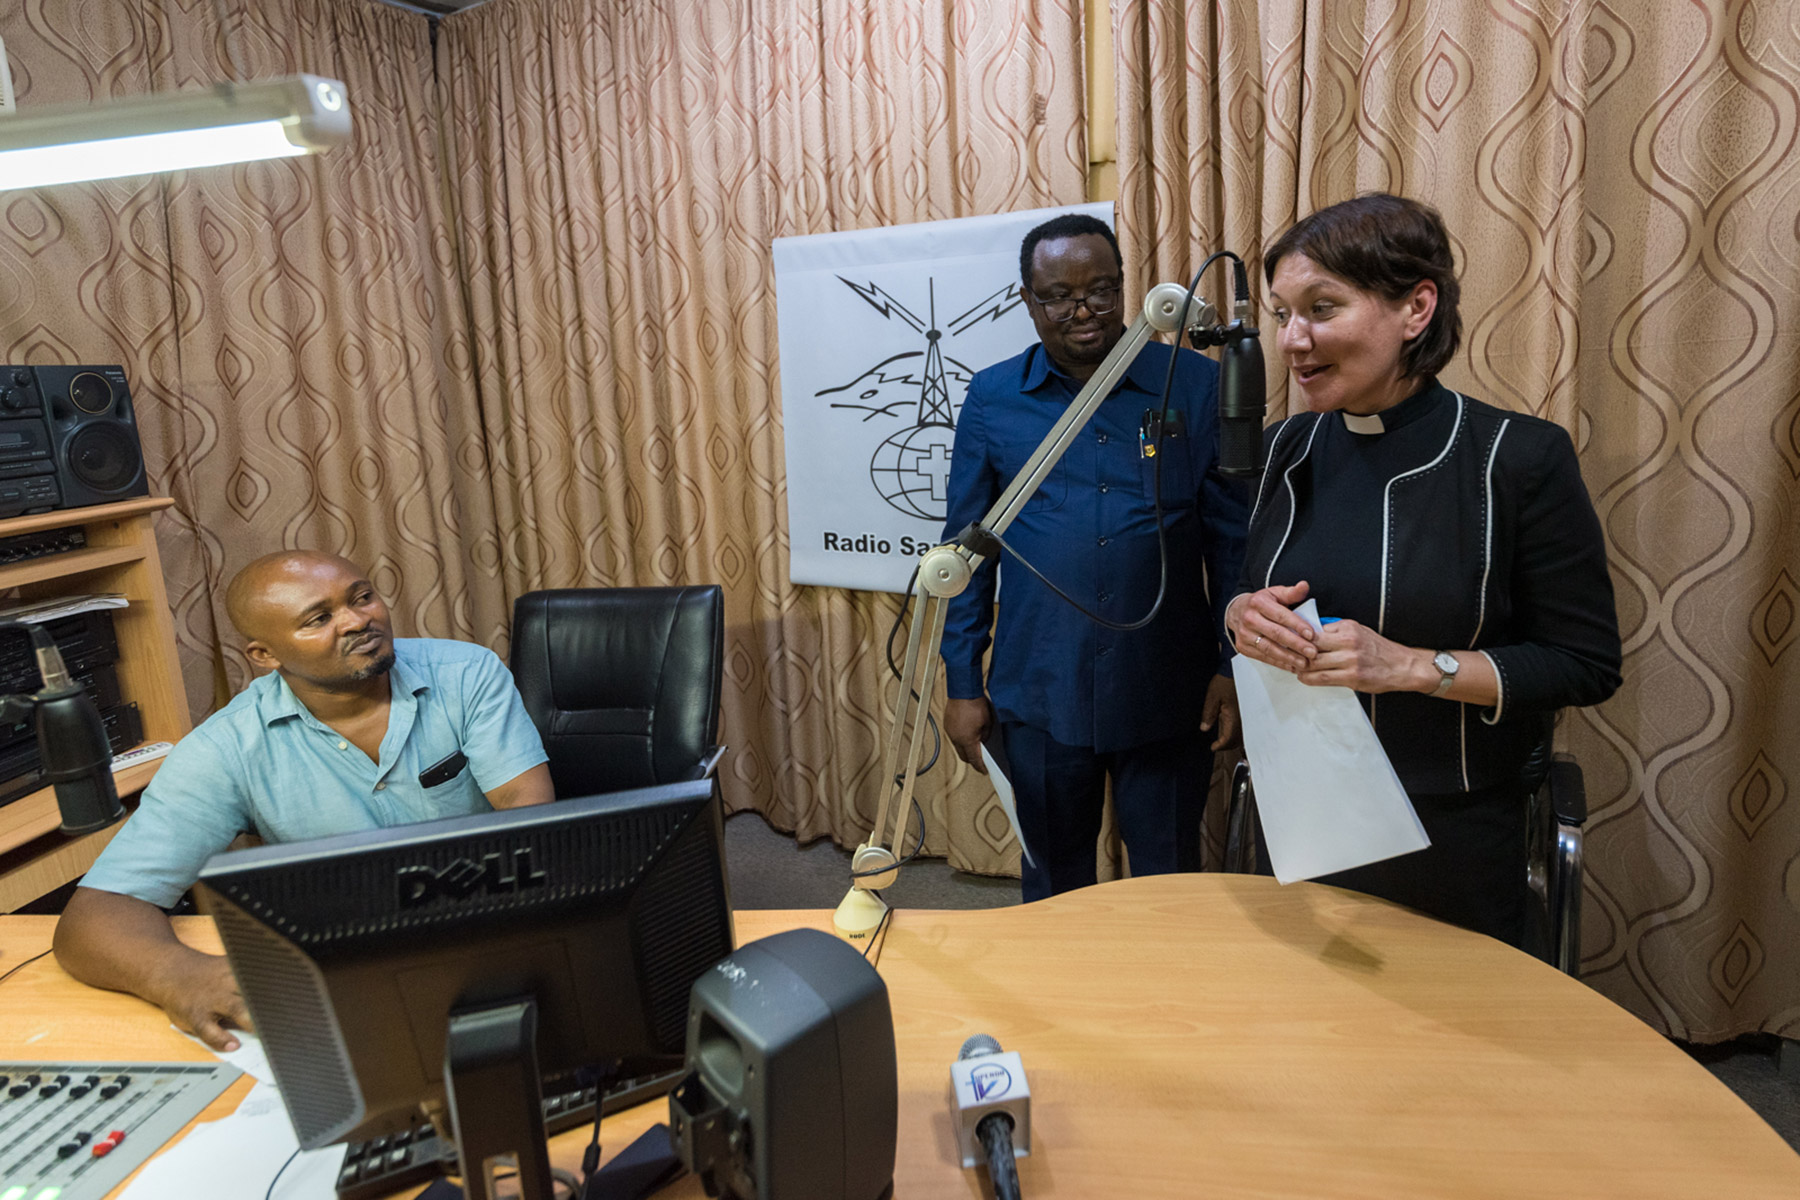 LWF General Secretary Rev. Anne Burghardt shares a greeting with listeners to the Evangelical Lutheran Church in Tanzania’s Radio Voice of the Gospel during live broadcast from the studio in Moshi on 26 March.